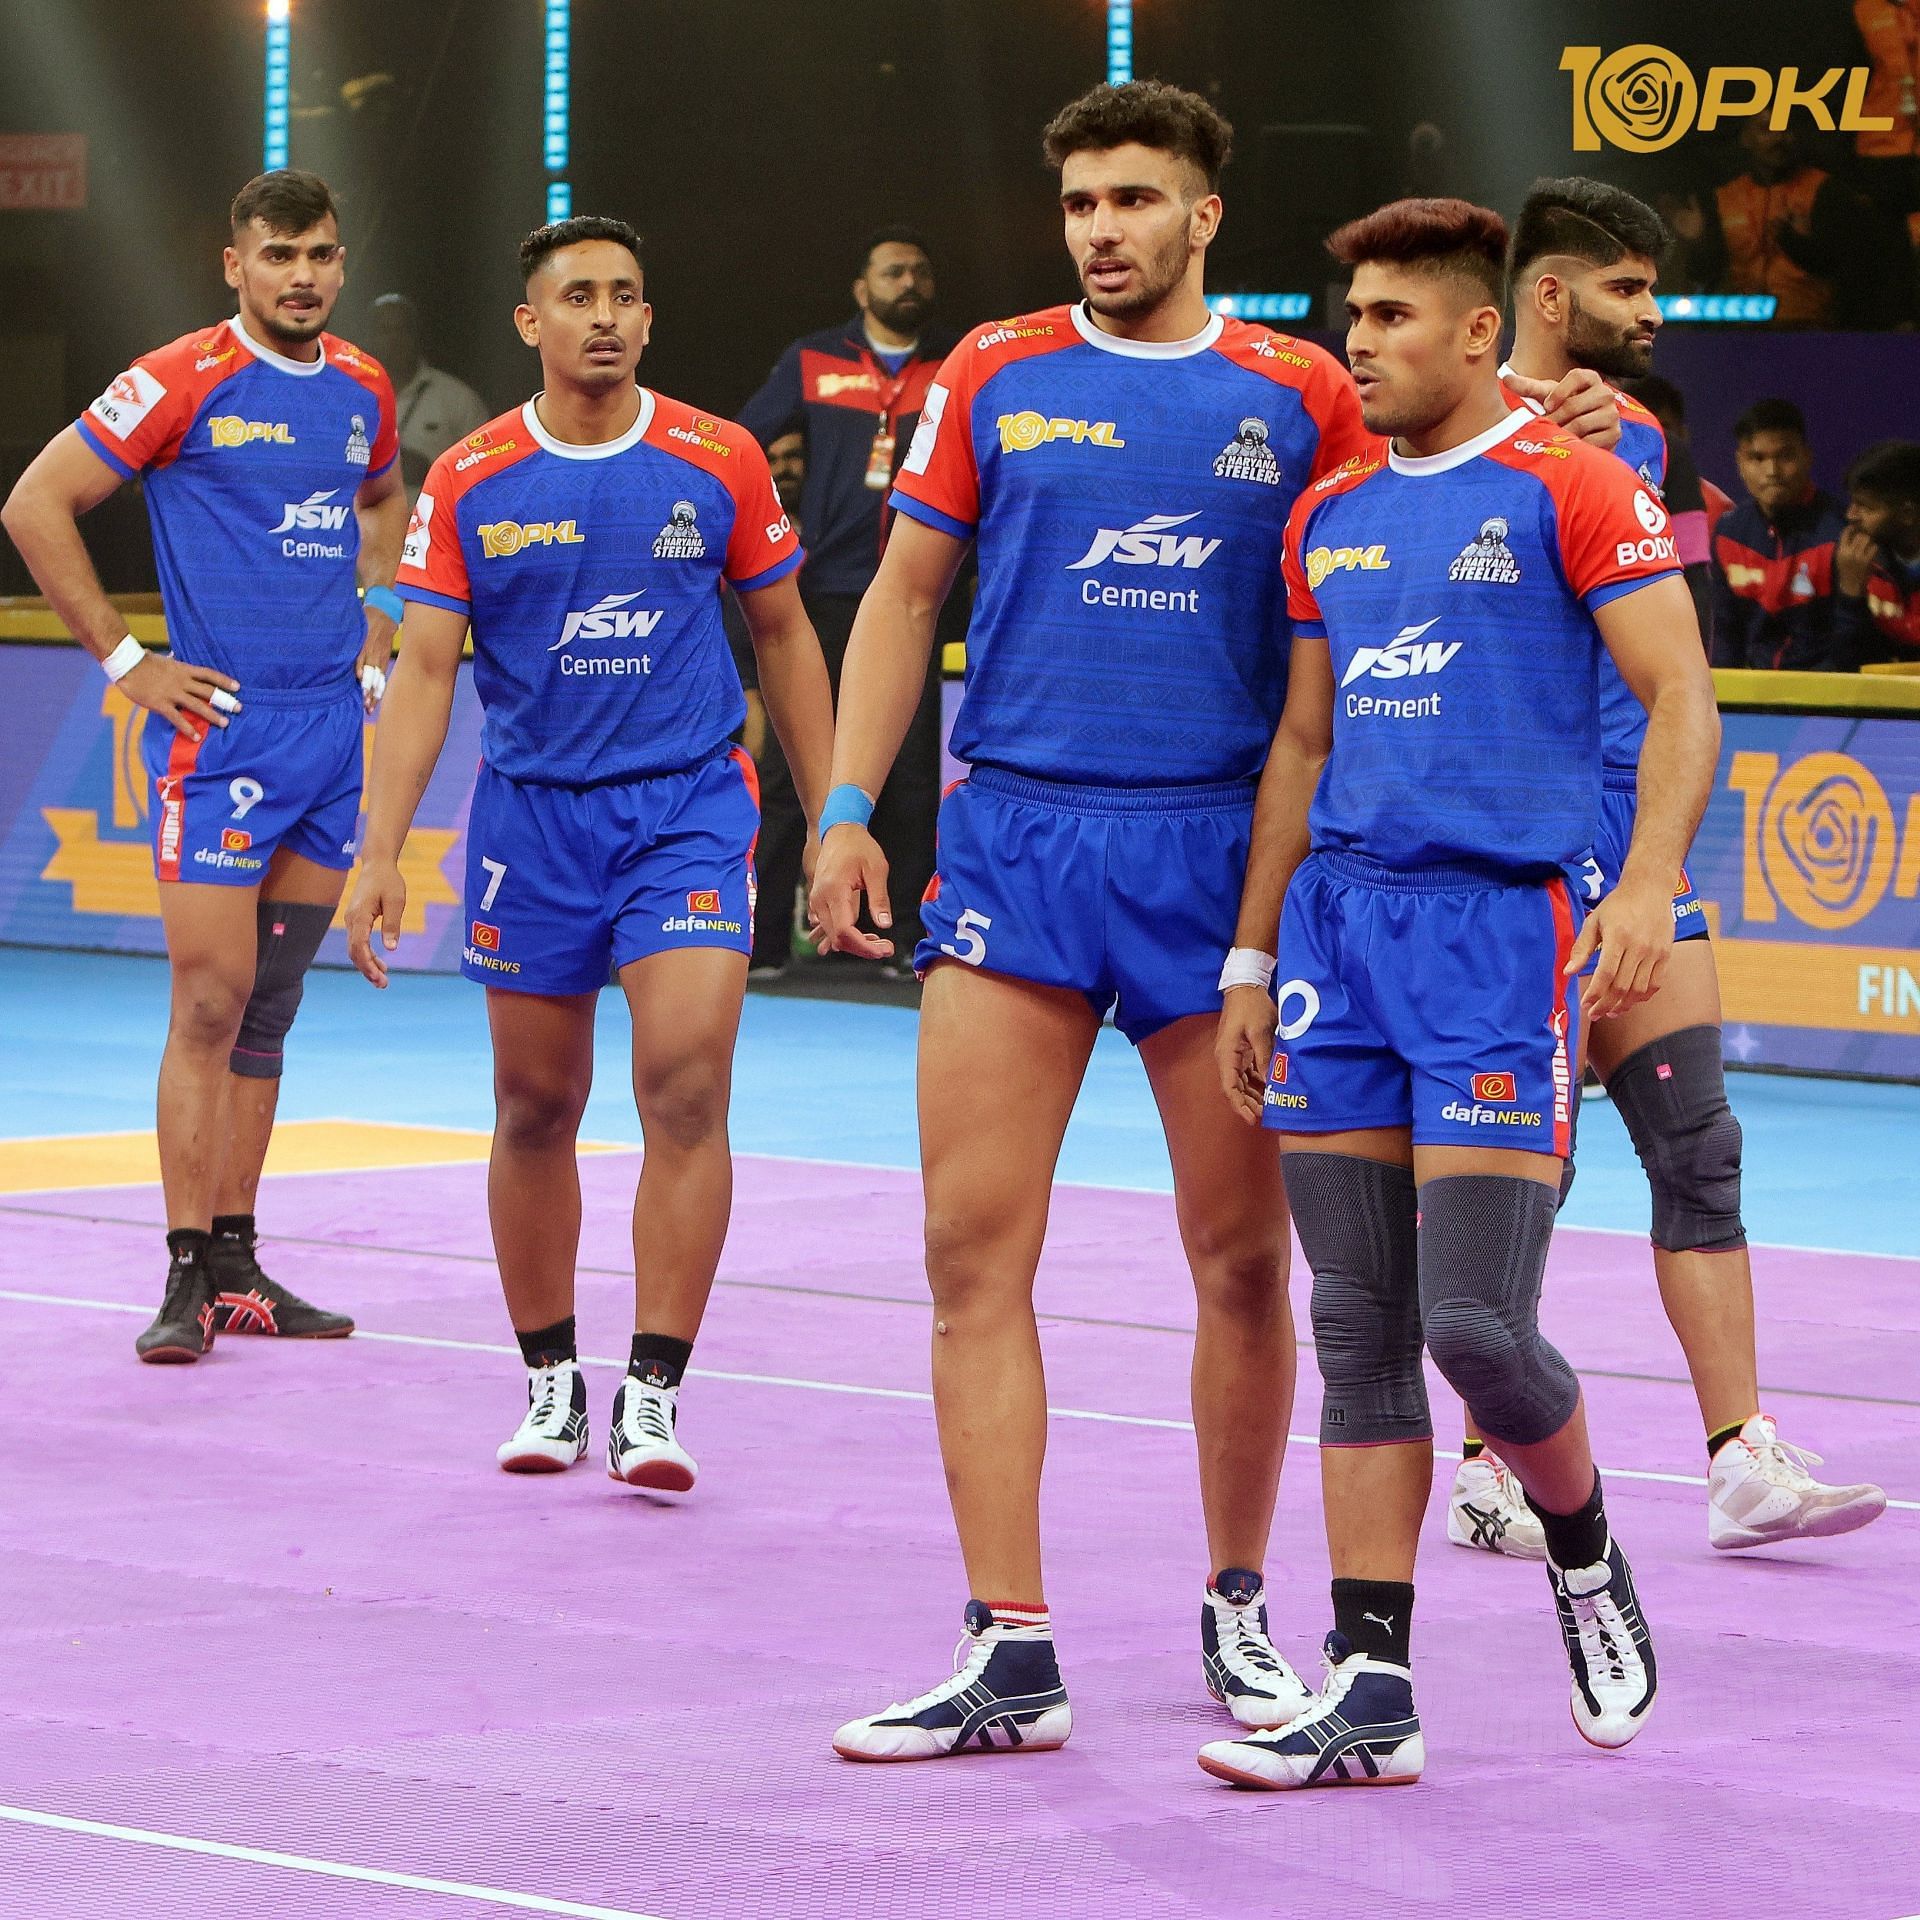 A desolate-looking Haryana Steelers side after their loss in the PKL final on Friday. [PKL Media]